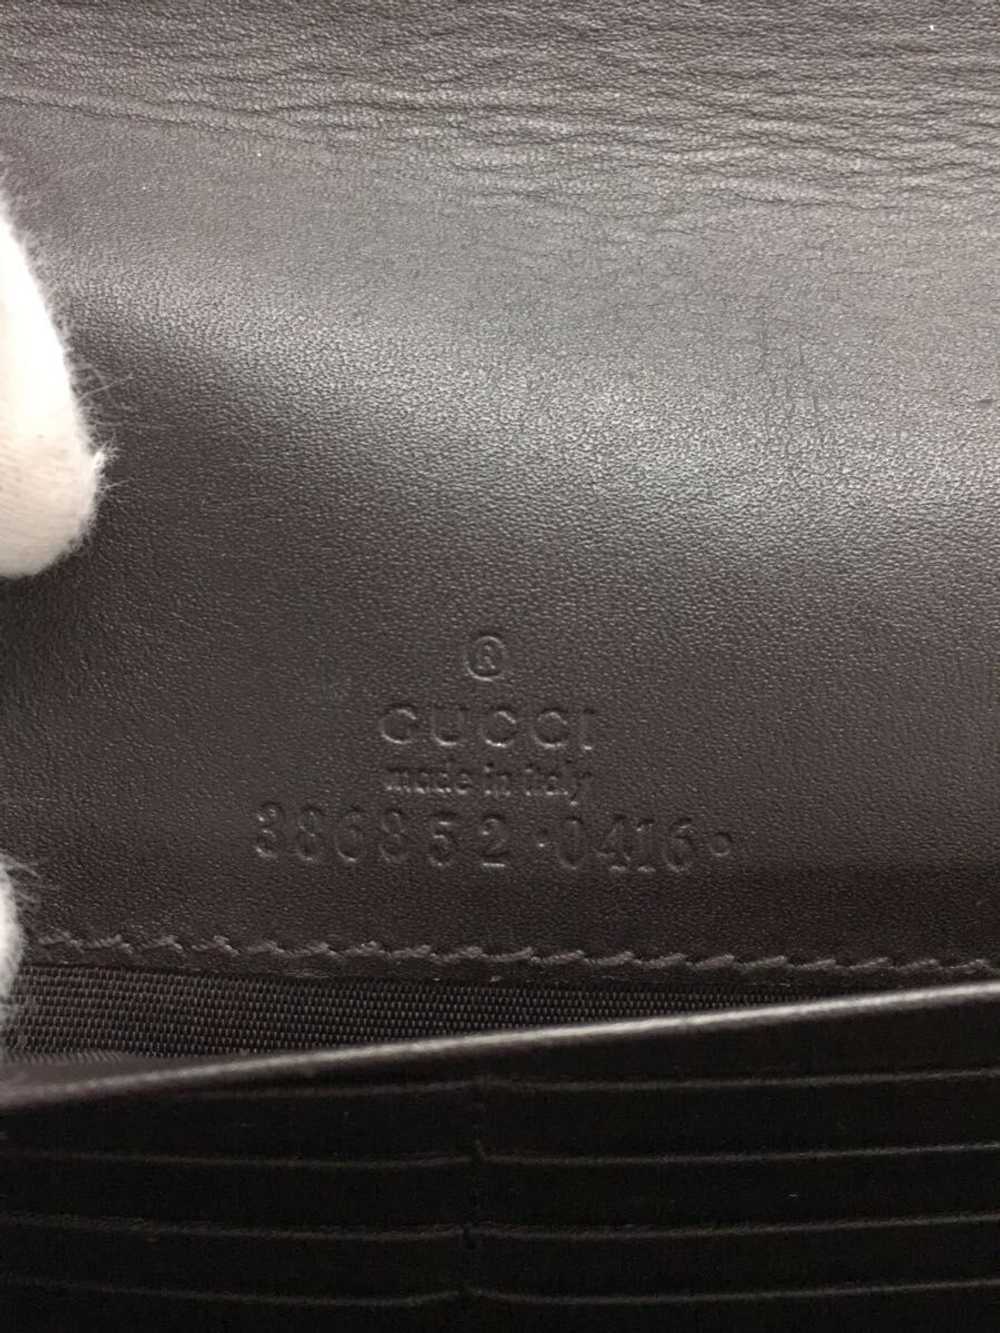 Used Gucci Scratches/Scratches/Dirty/Gg Supreme/C… - image 5